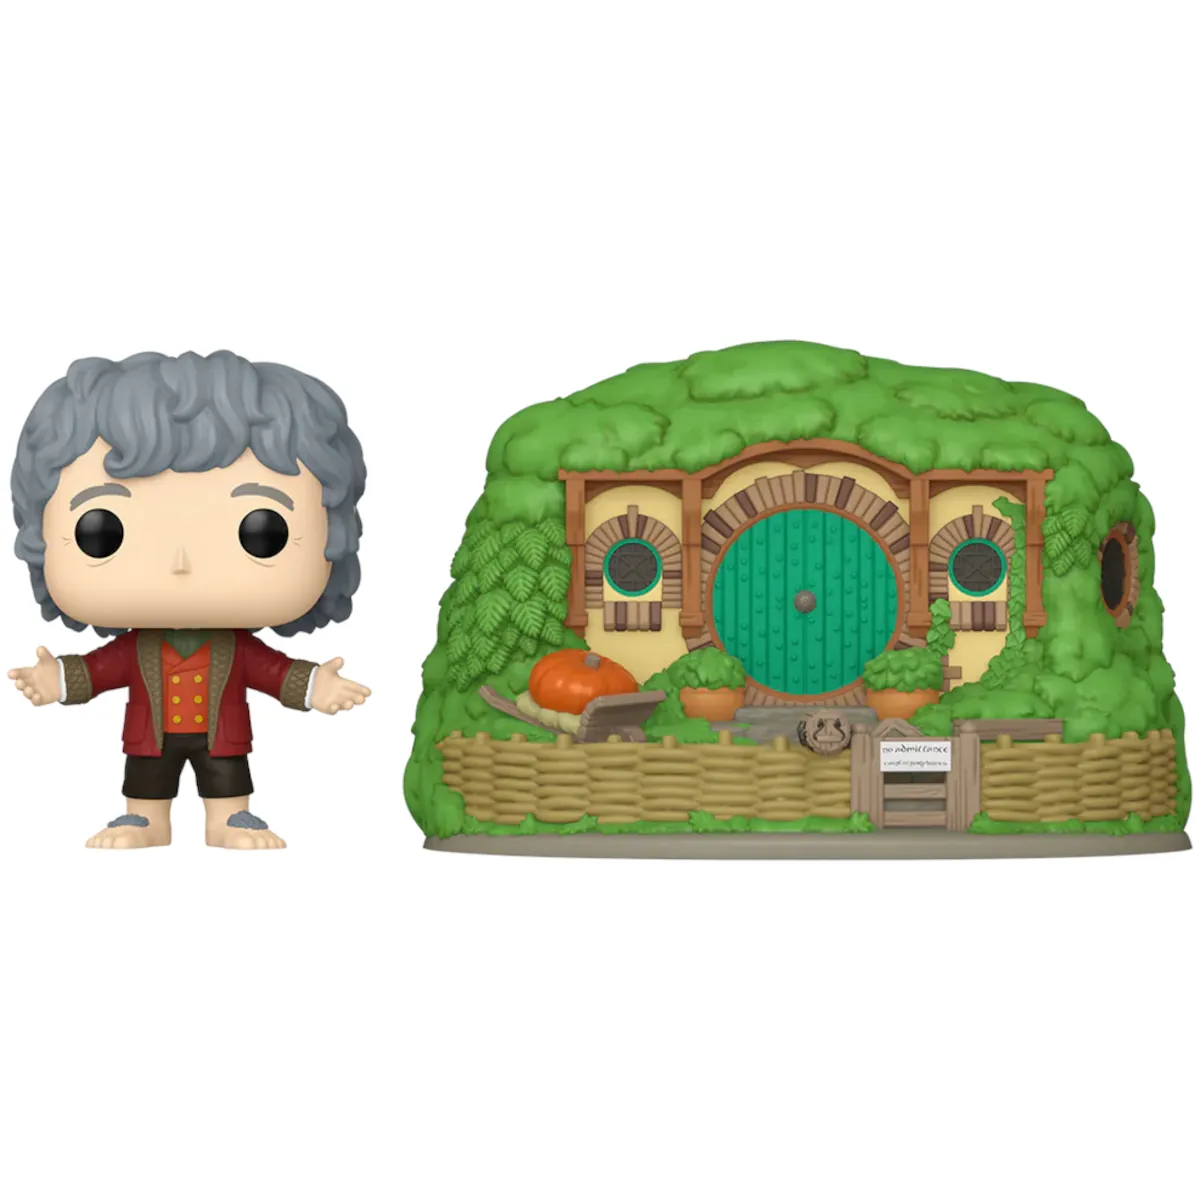 80835 Funko Pop! Town - The Lord of the Rings - Bilbo Baggins with Bag-End Collectable Vinyl Figure